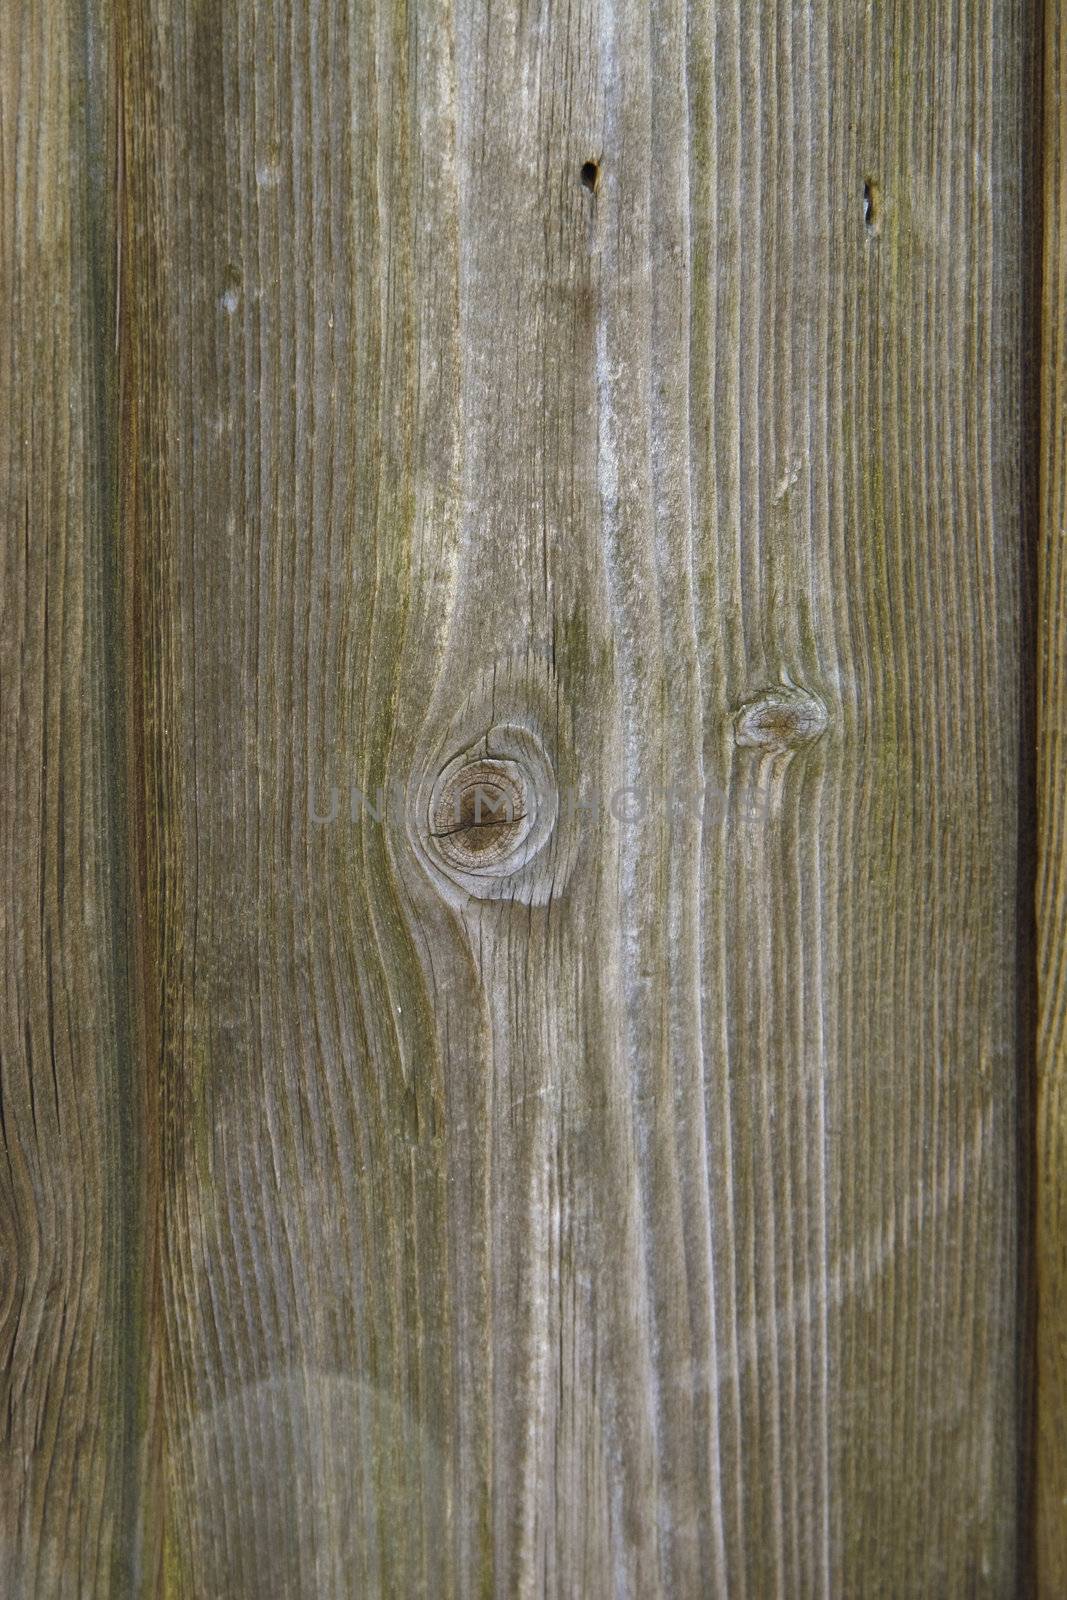 detail of the wooden slats of a wooden fence